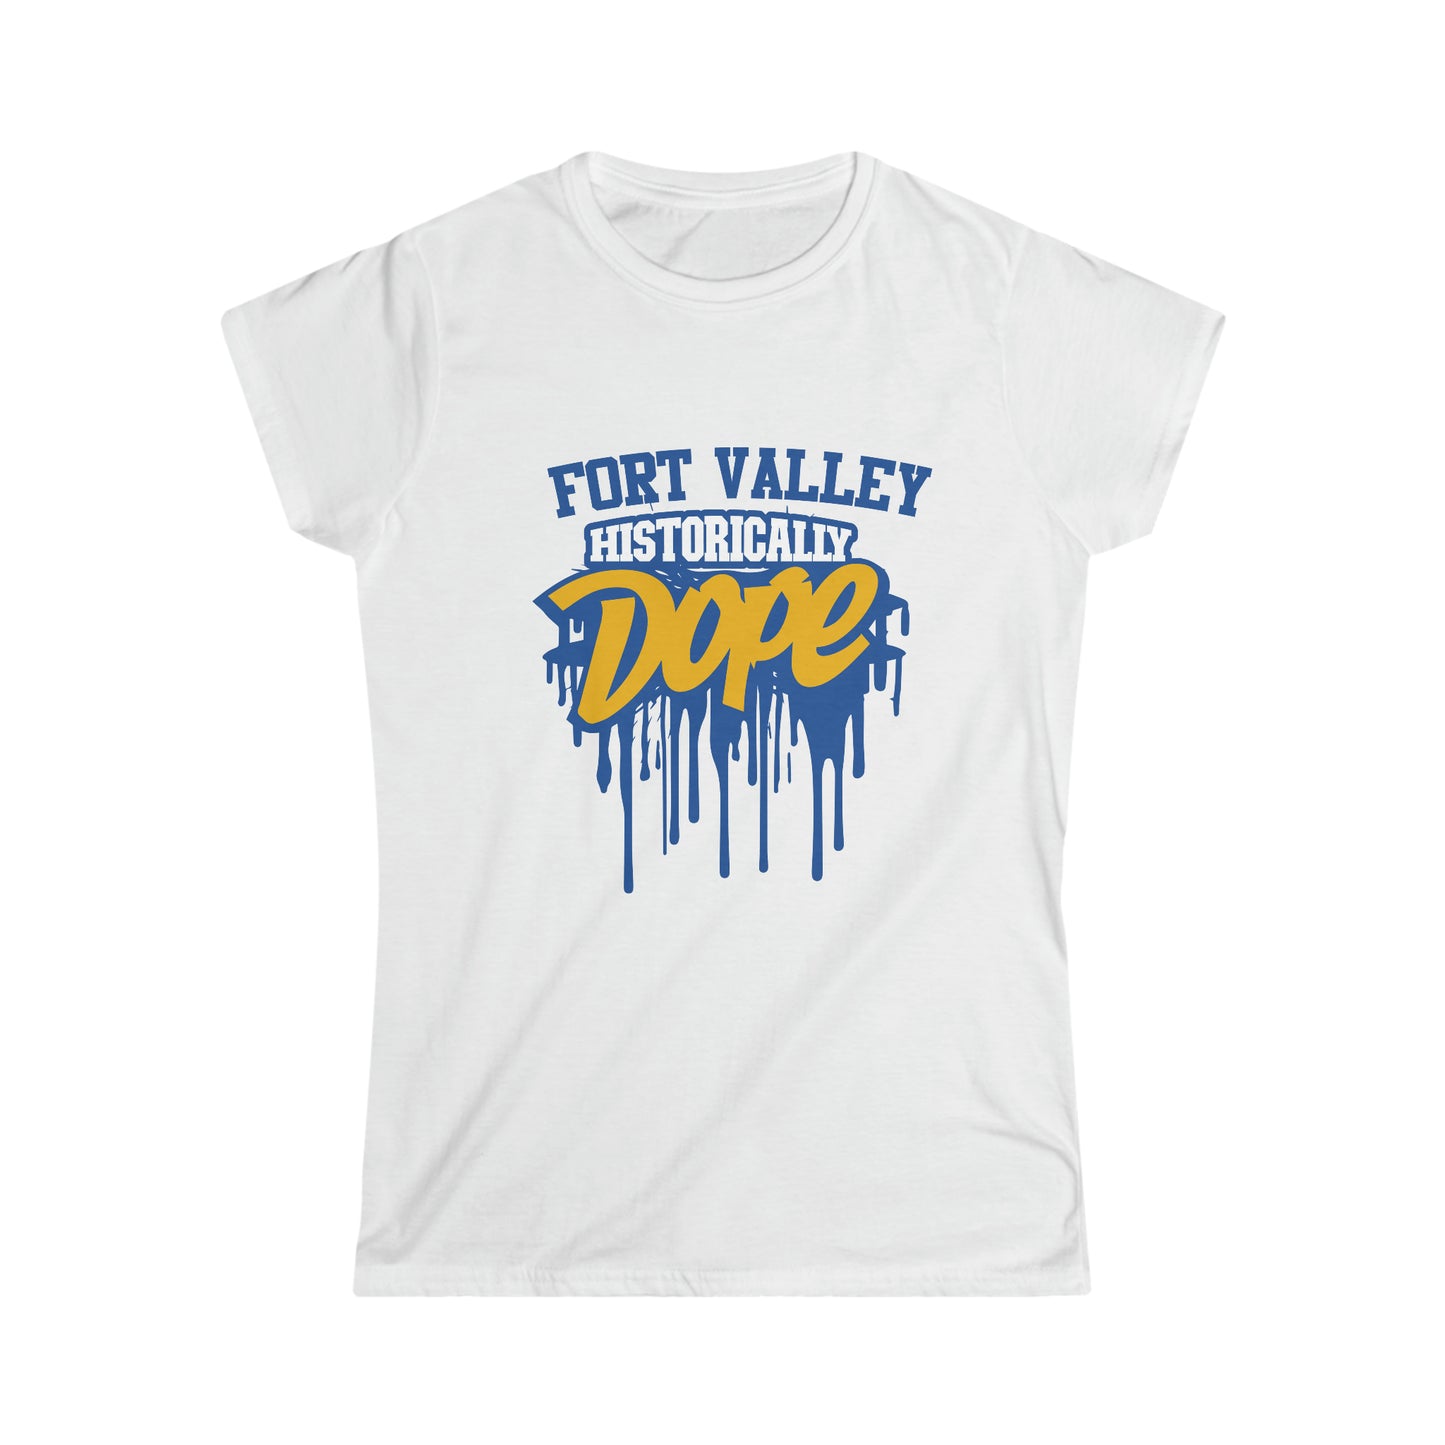 HBCU Love (Fort Valley Historically Dope/ Women's Softstyle Tee)